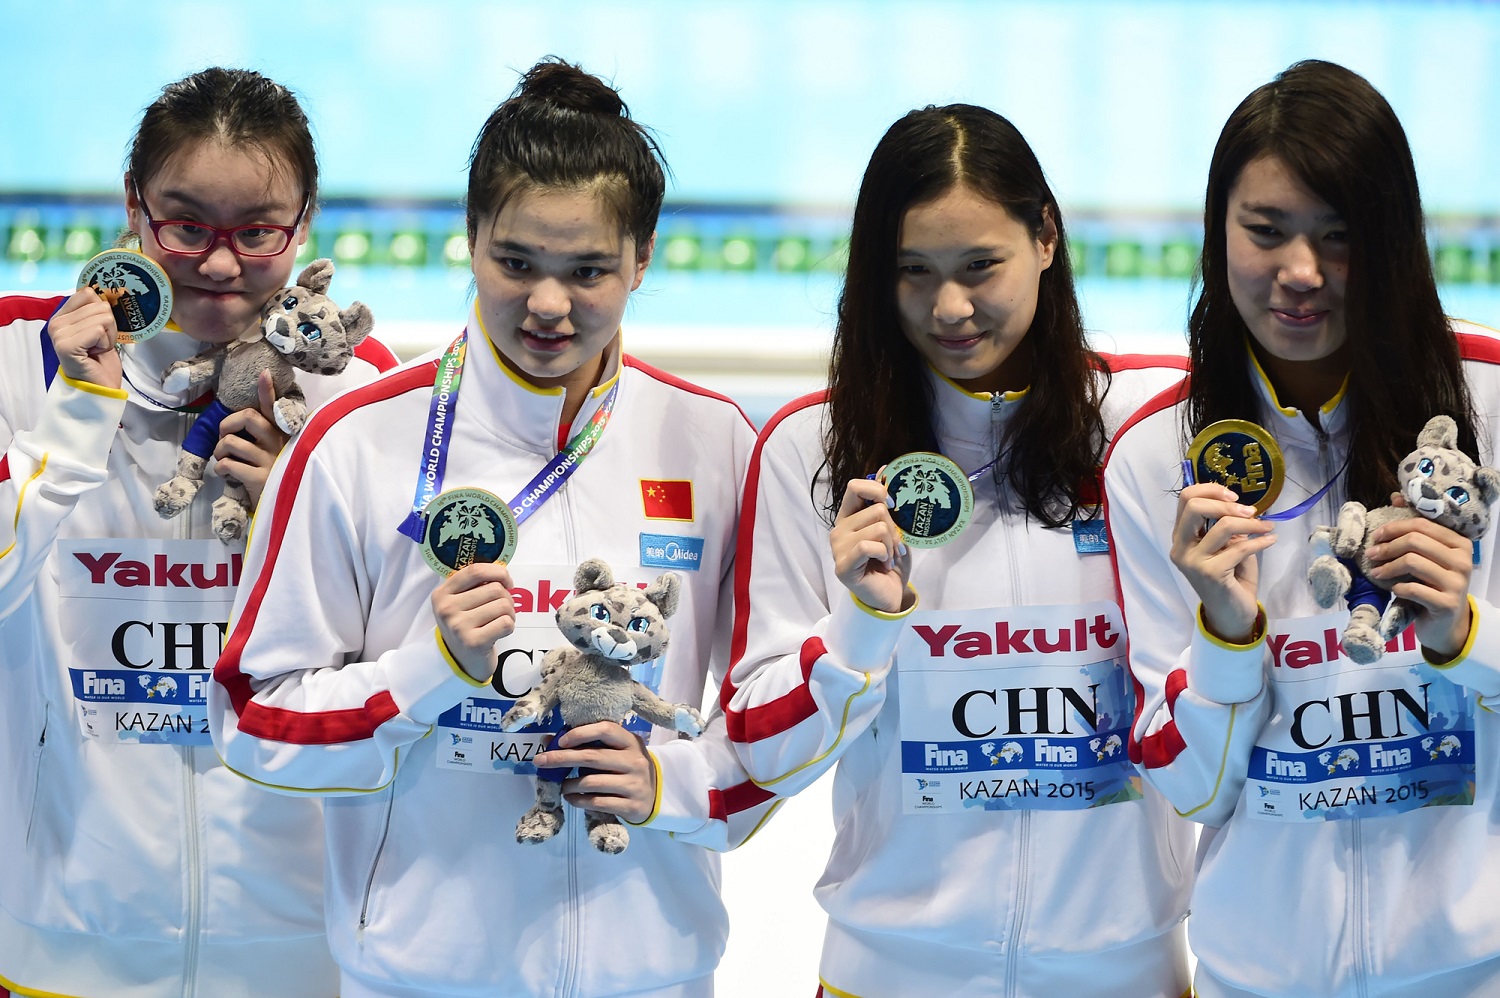 Team China celebrates its gold medal during the podium ceremony for the women's 4x100m medley relay swimming event at the 2015 FINA World Championships in Kazan on August 9, 2015. Shi Jinglin, Lu Ying, Fu YuanHui and Shen Duo competed in the event. AFP PHOTO / ALEXANDER NEMENOV, via VCG